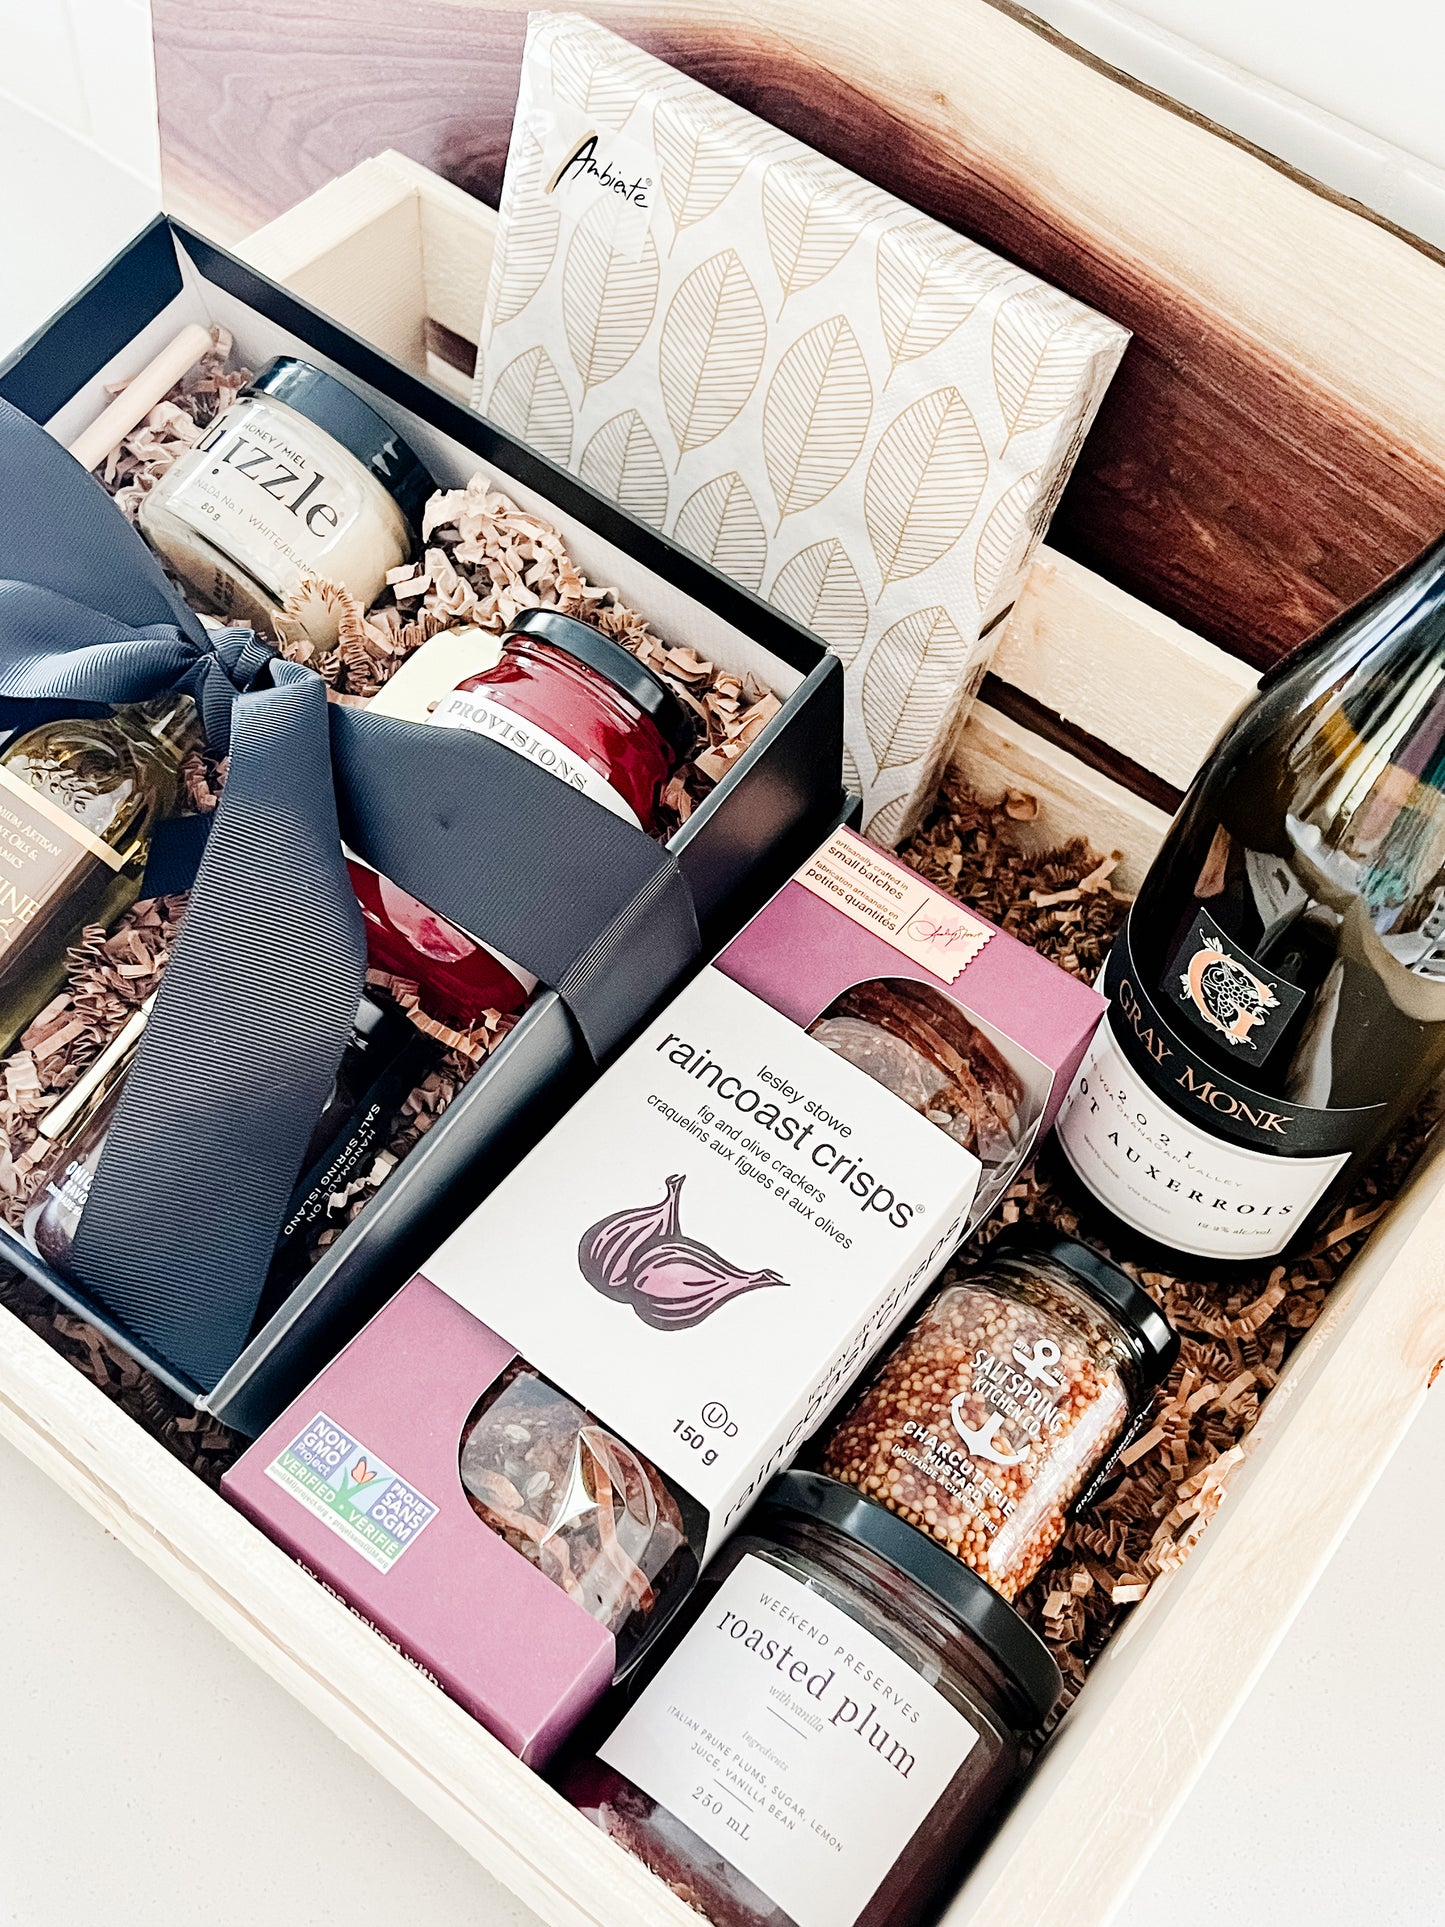 DELUXE CHARCUTERIE BOARD GIFT CRATE